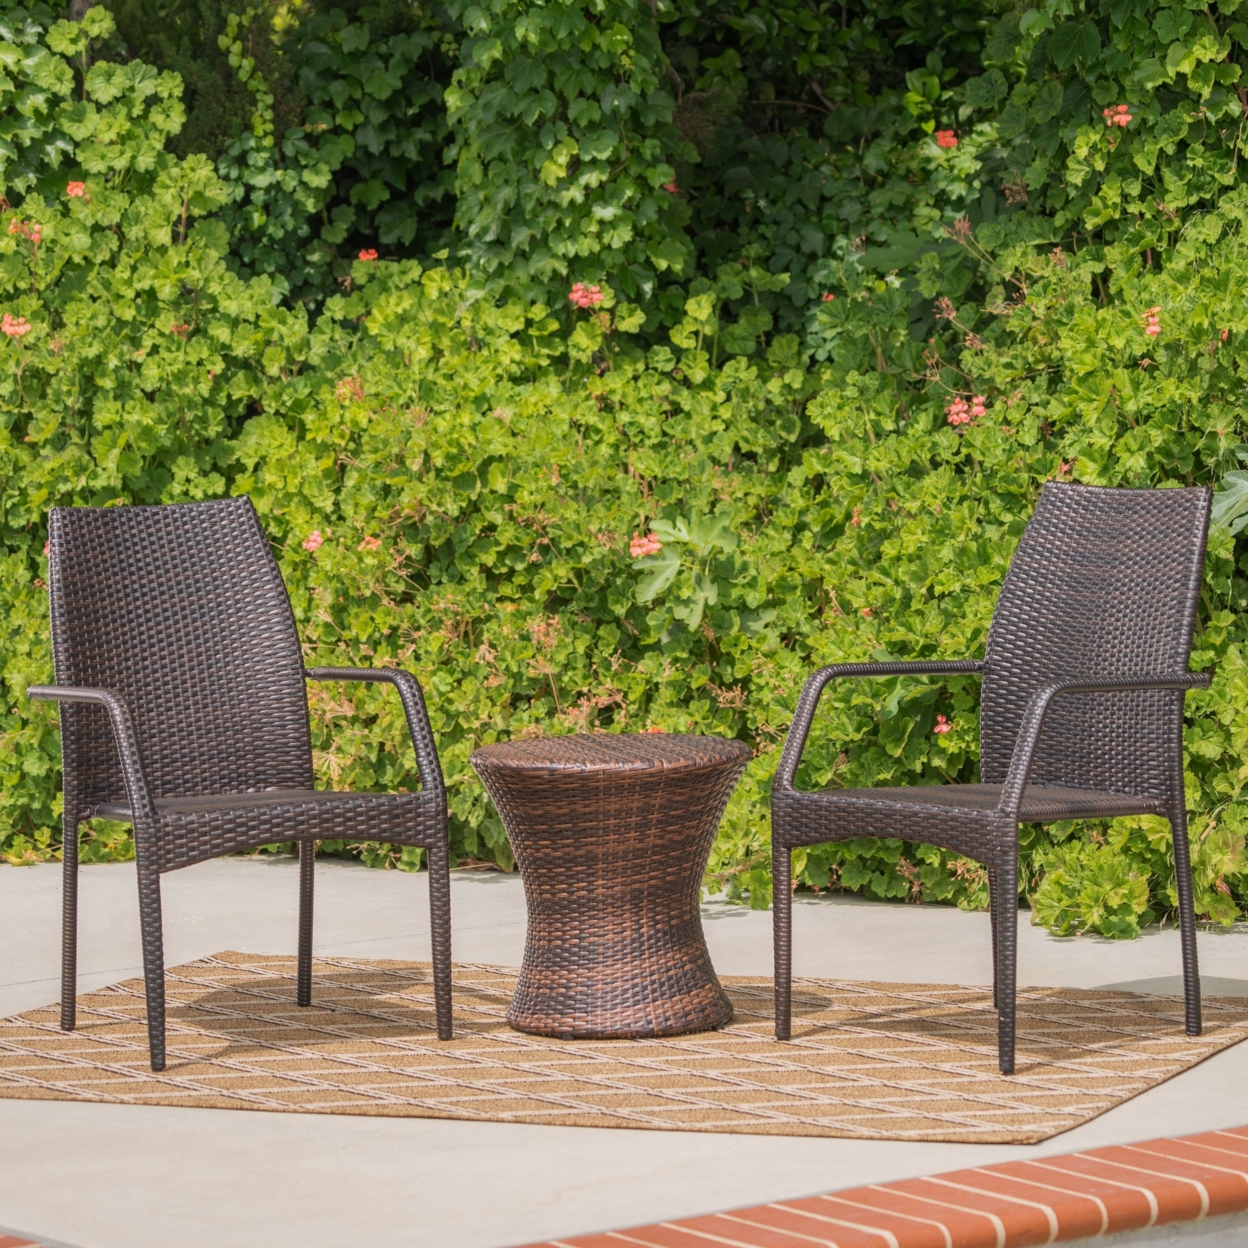 Dawson Outdoor 3 Piece Multi-brown Wicker Stacking Chair Chat Set - Box Table, Brown